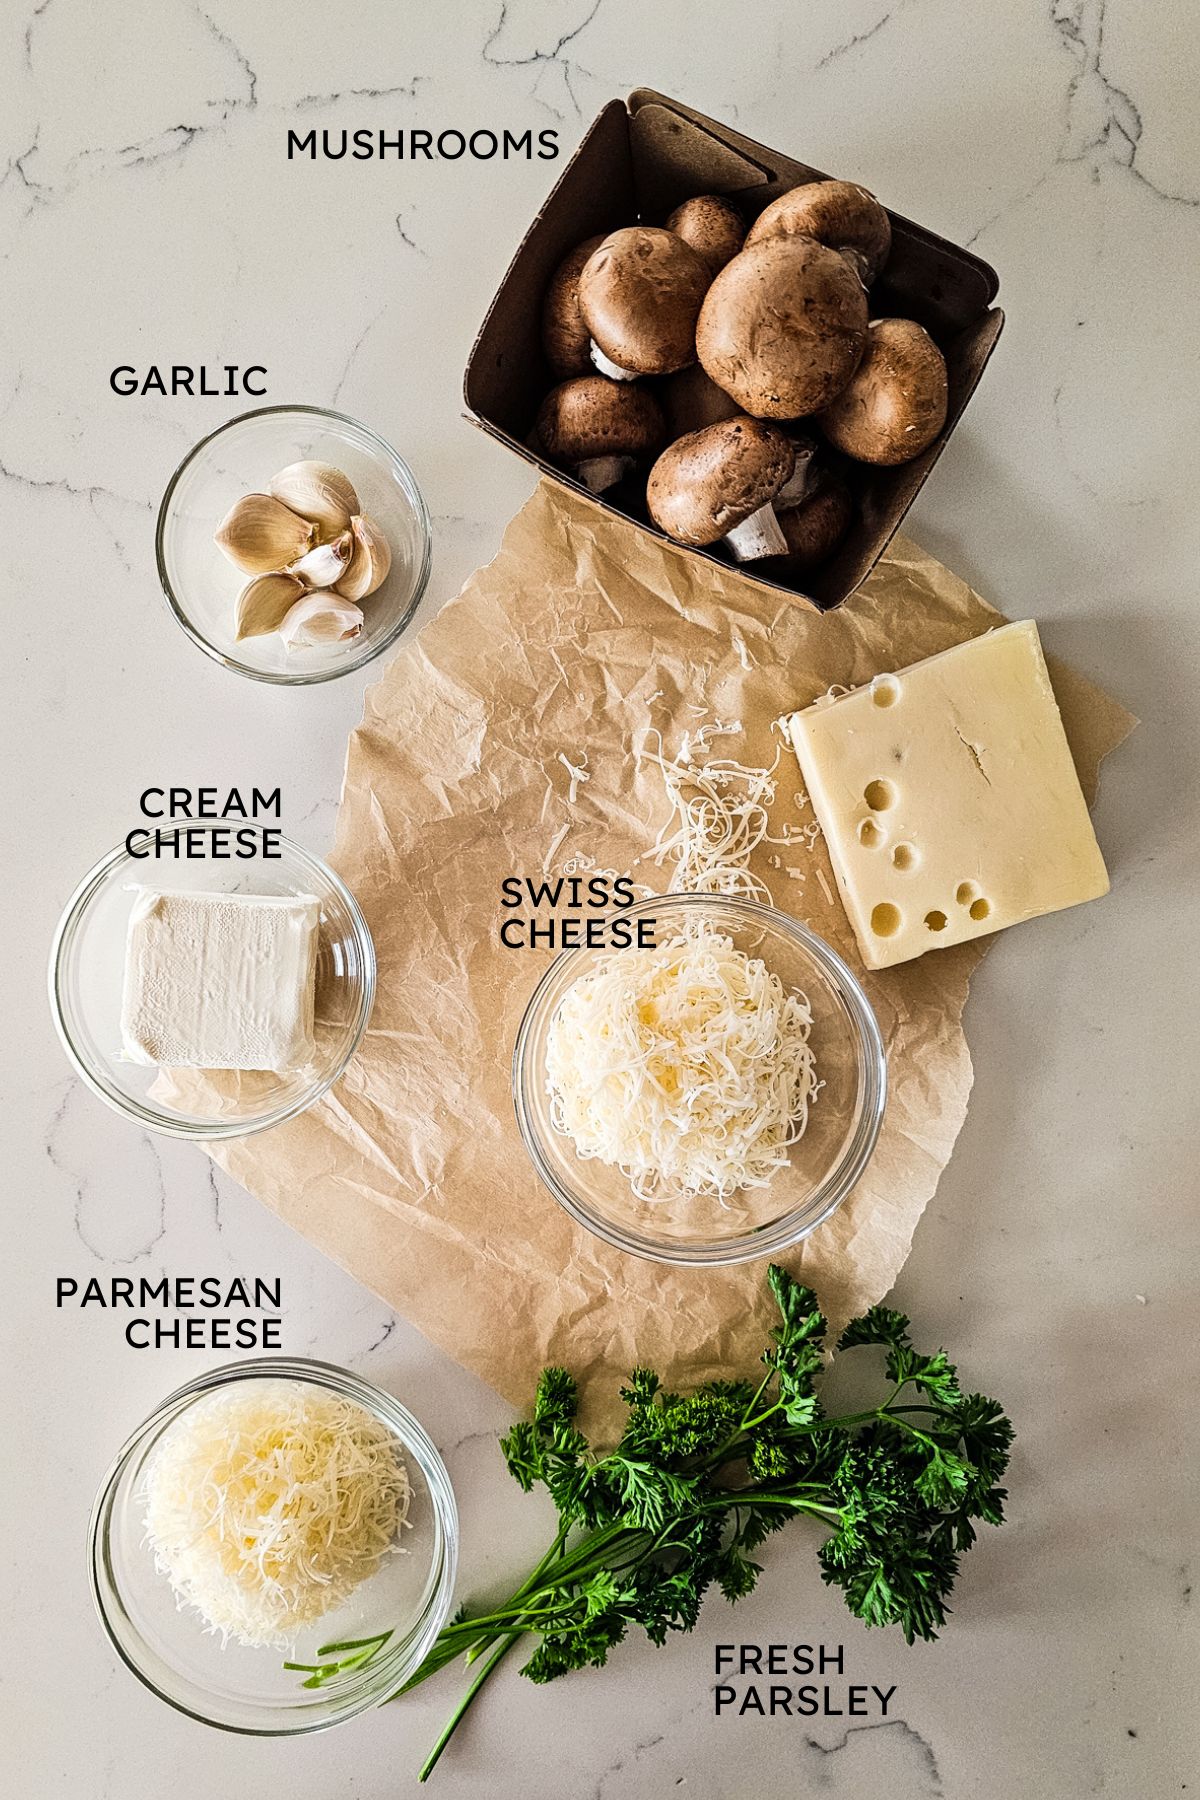 overlay of ingredients for stuffed mushrooms with mushrooms, cheeses, garlic, and fresh parsley.